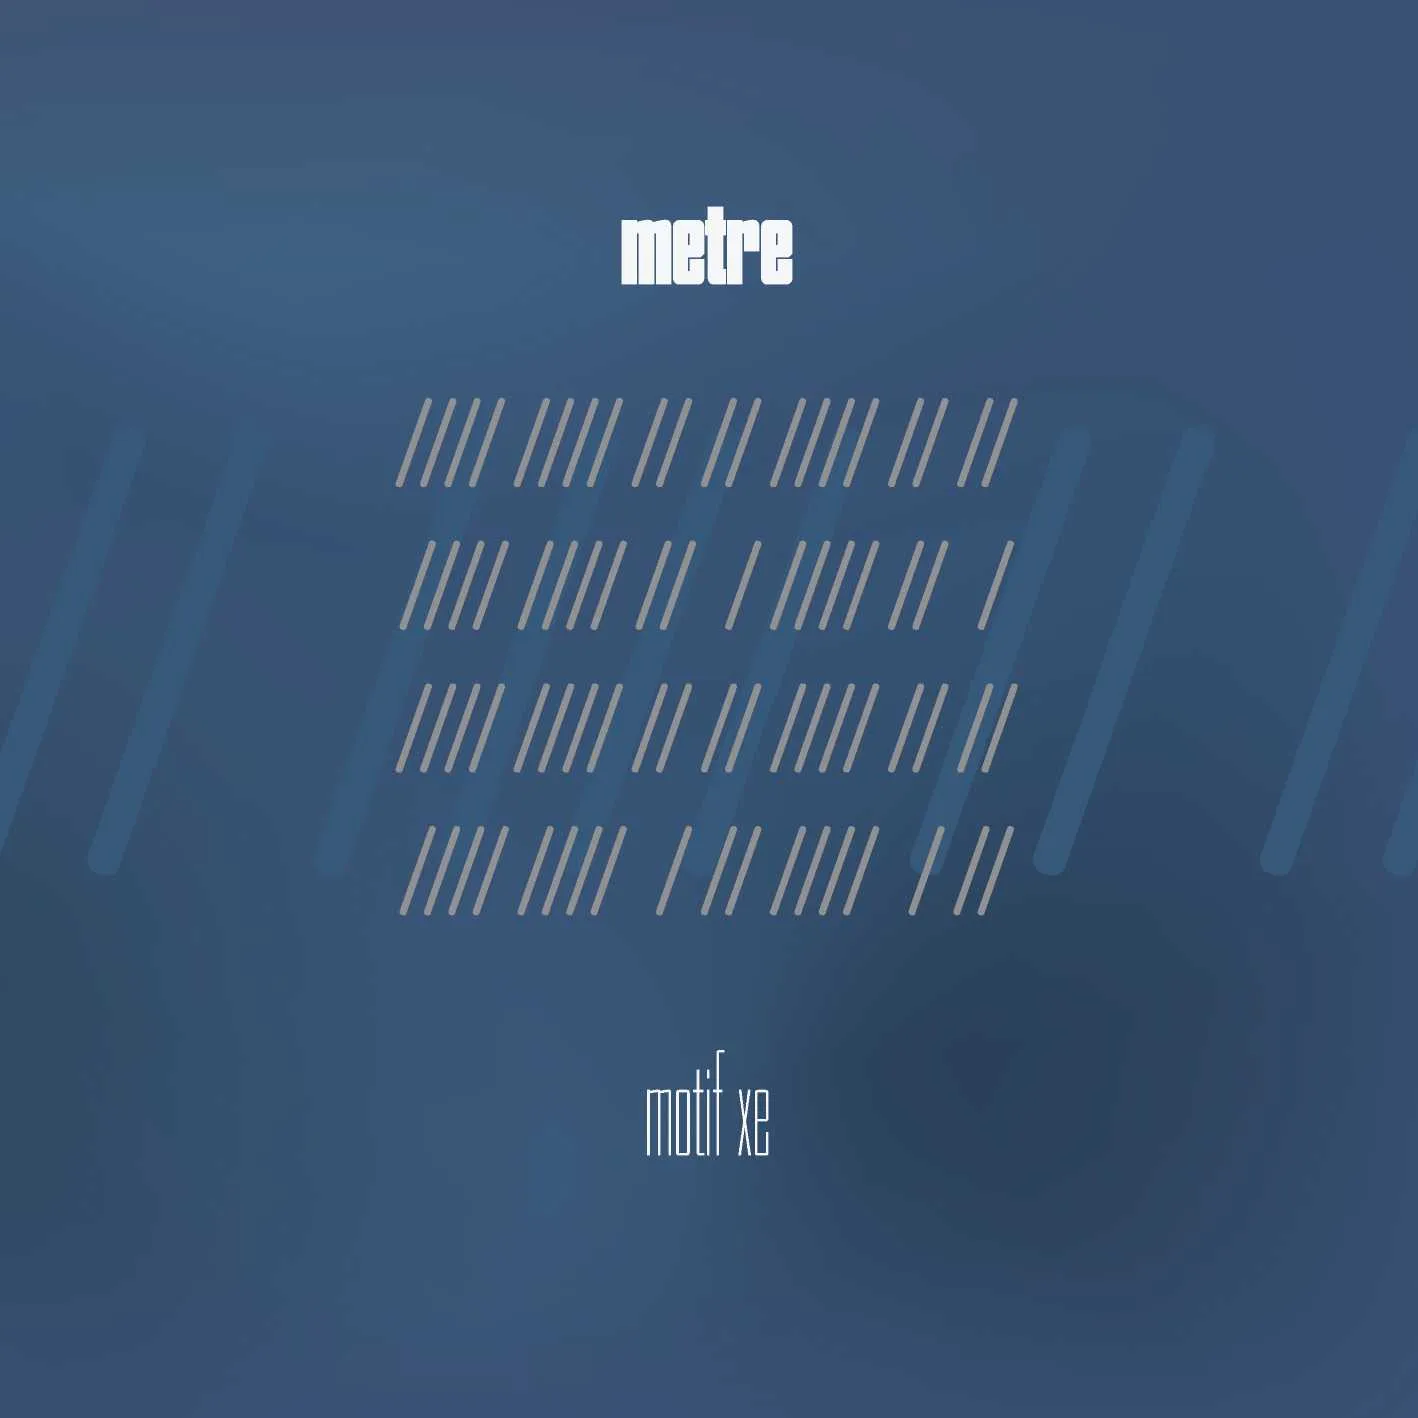 Album cover for “Motif XE” by Metre